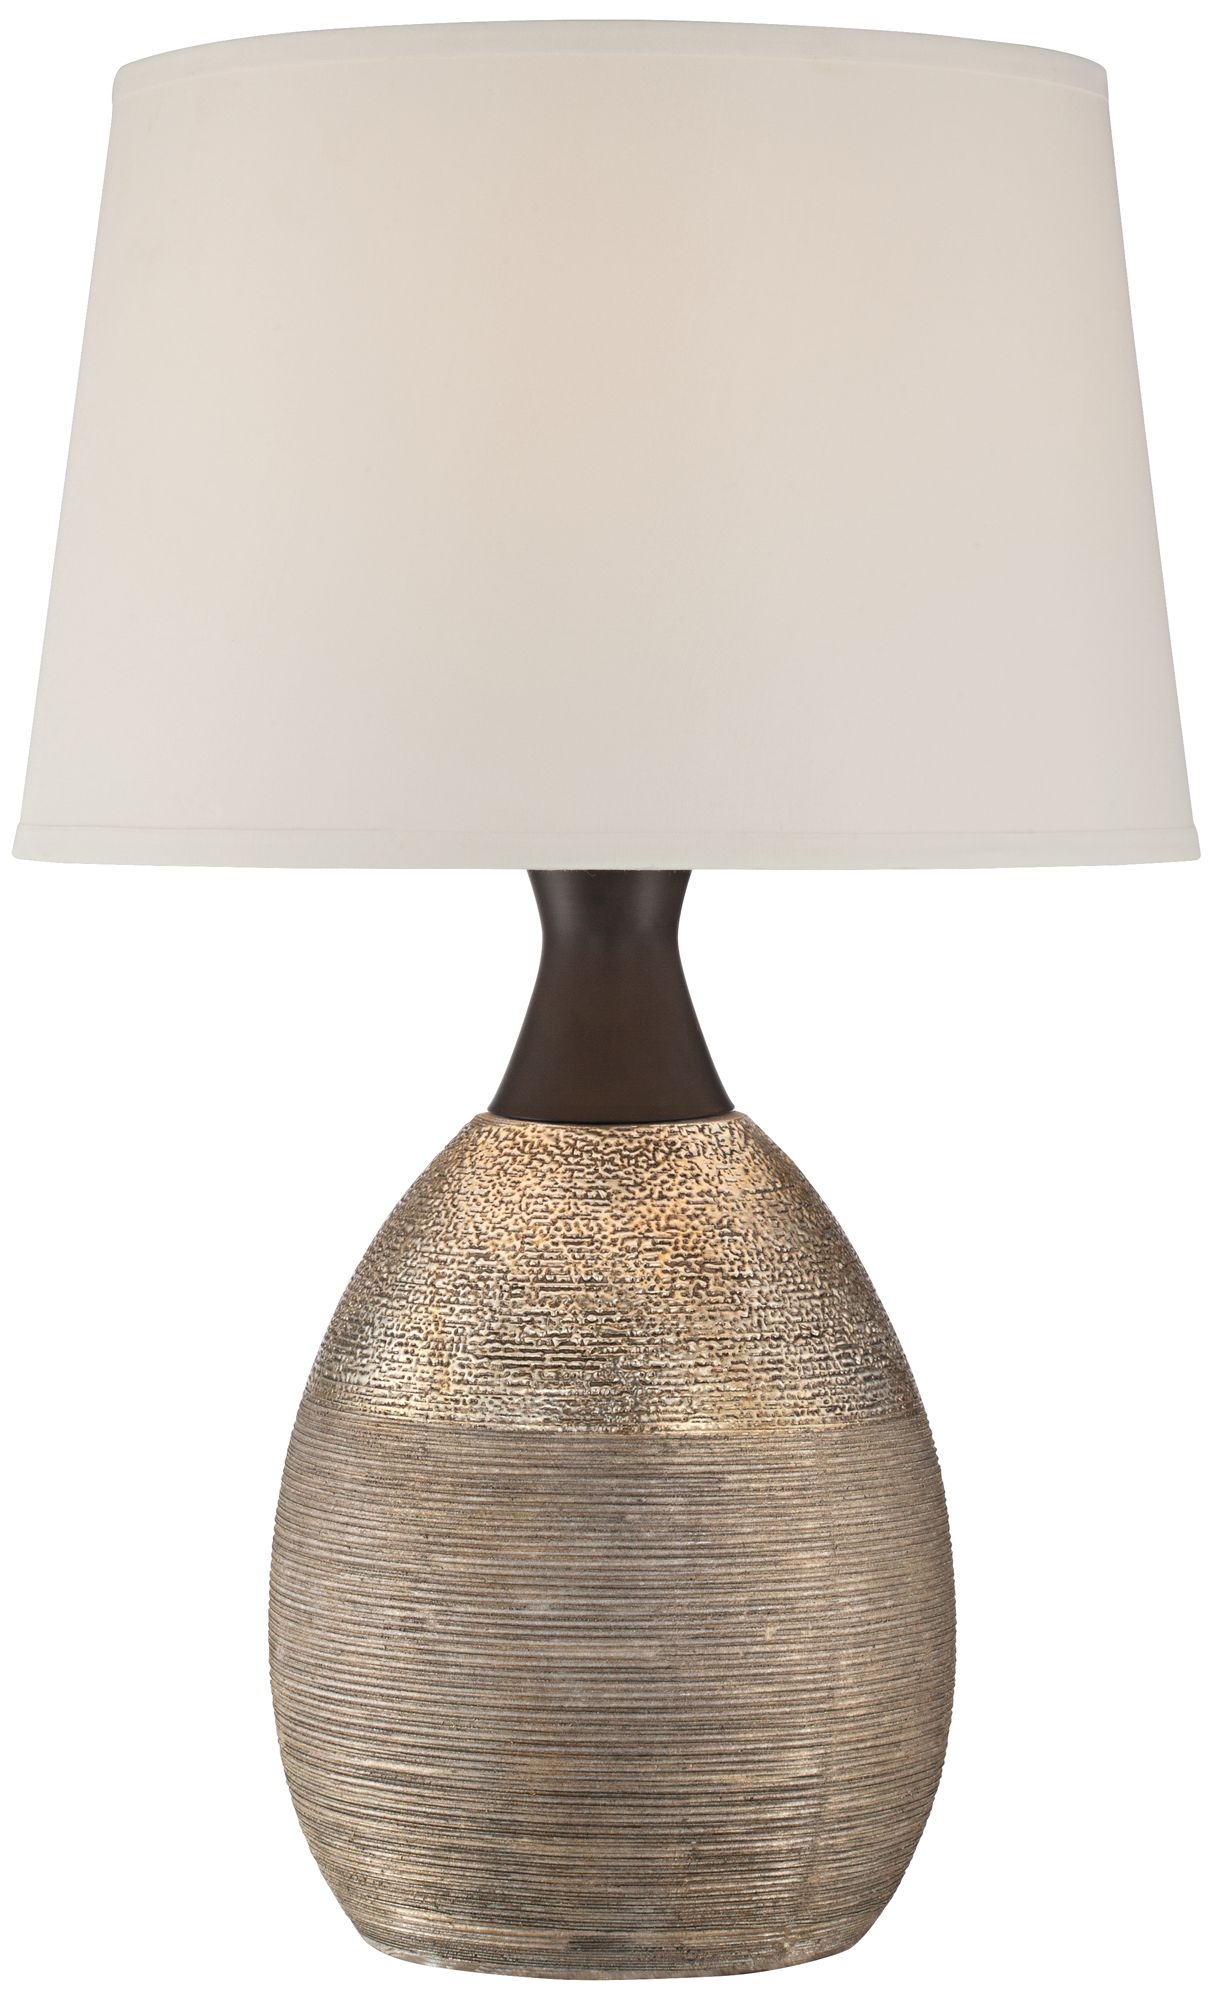 Leyna Textured Brown Ceramic Table Lamp - Image 0